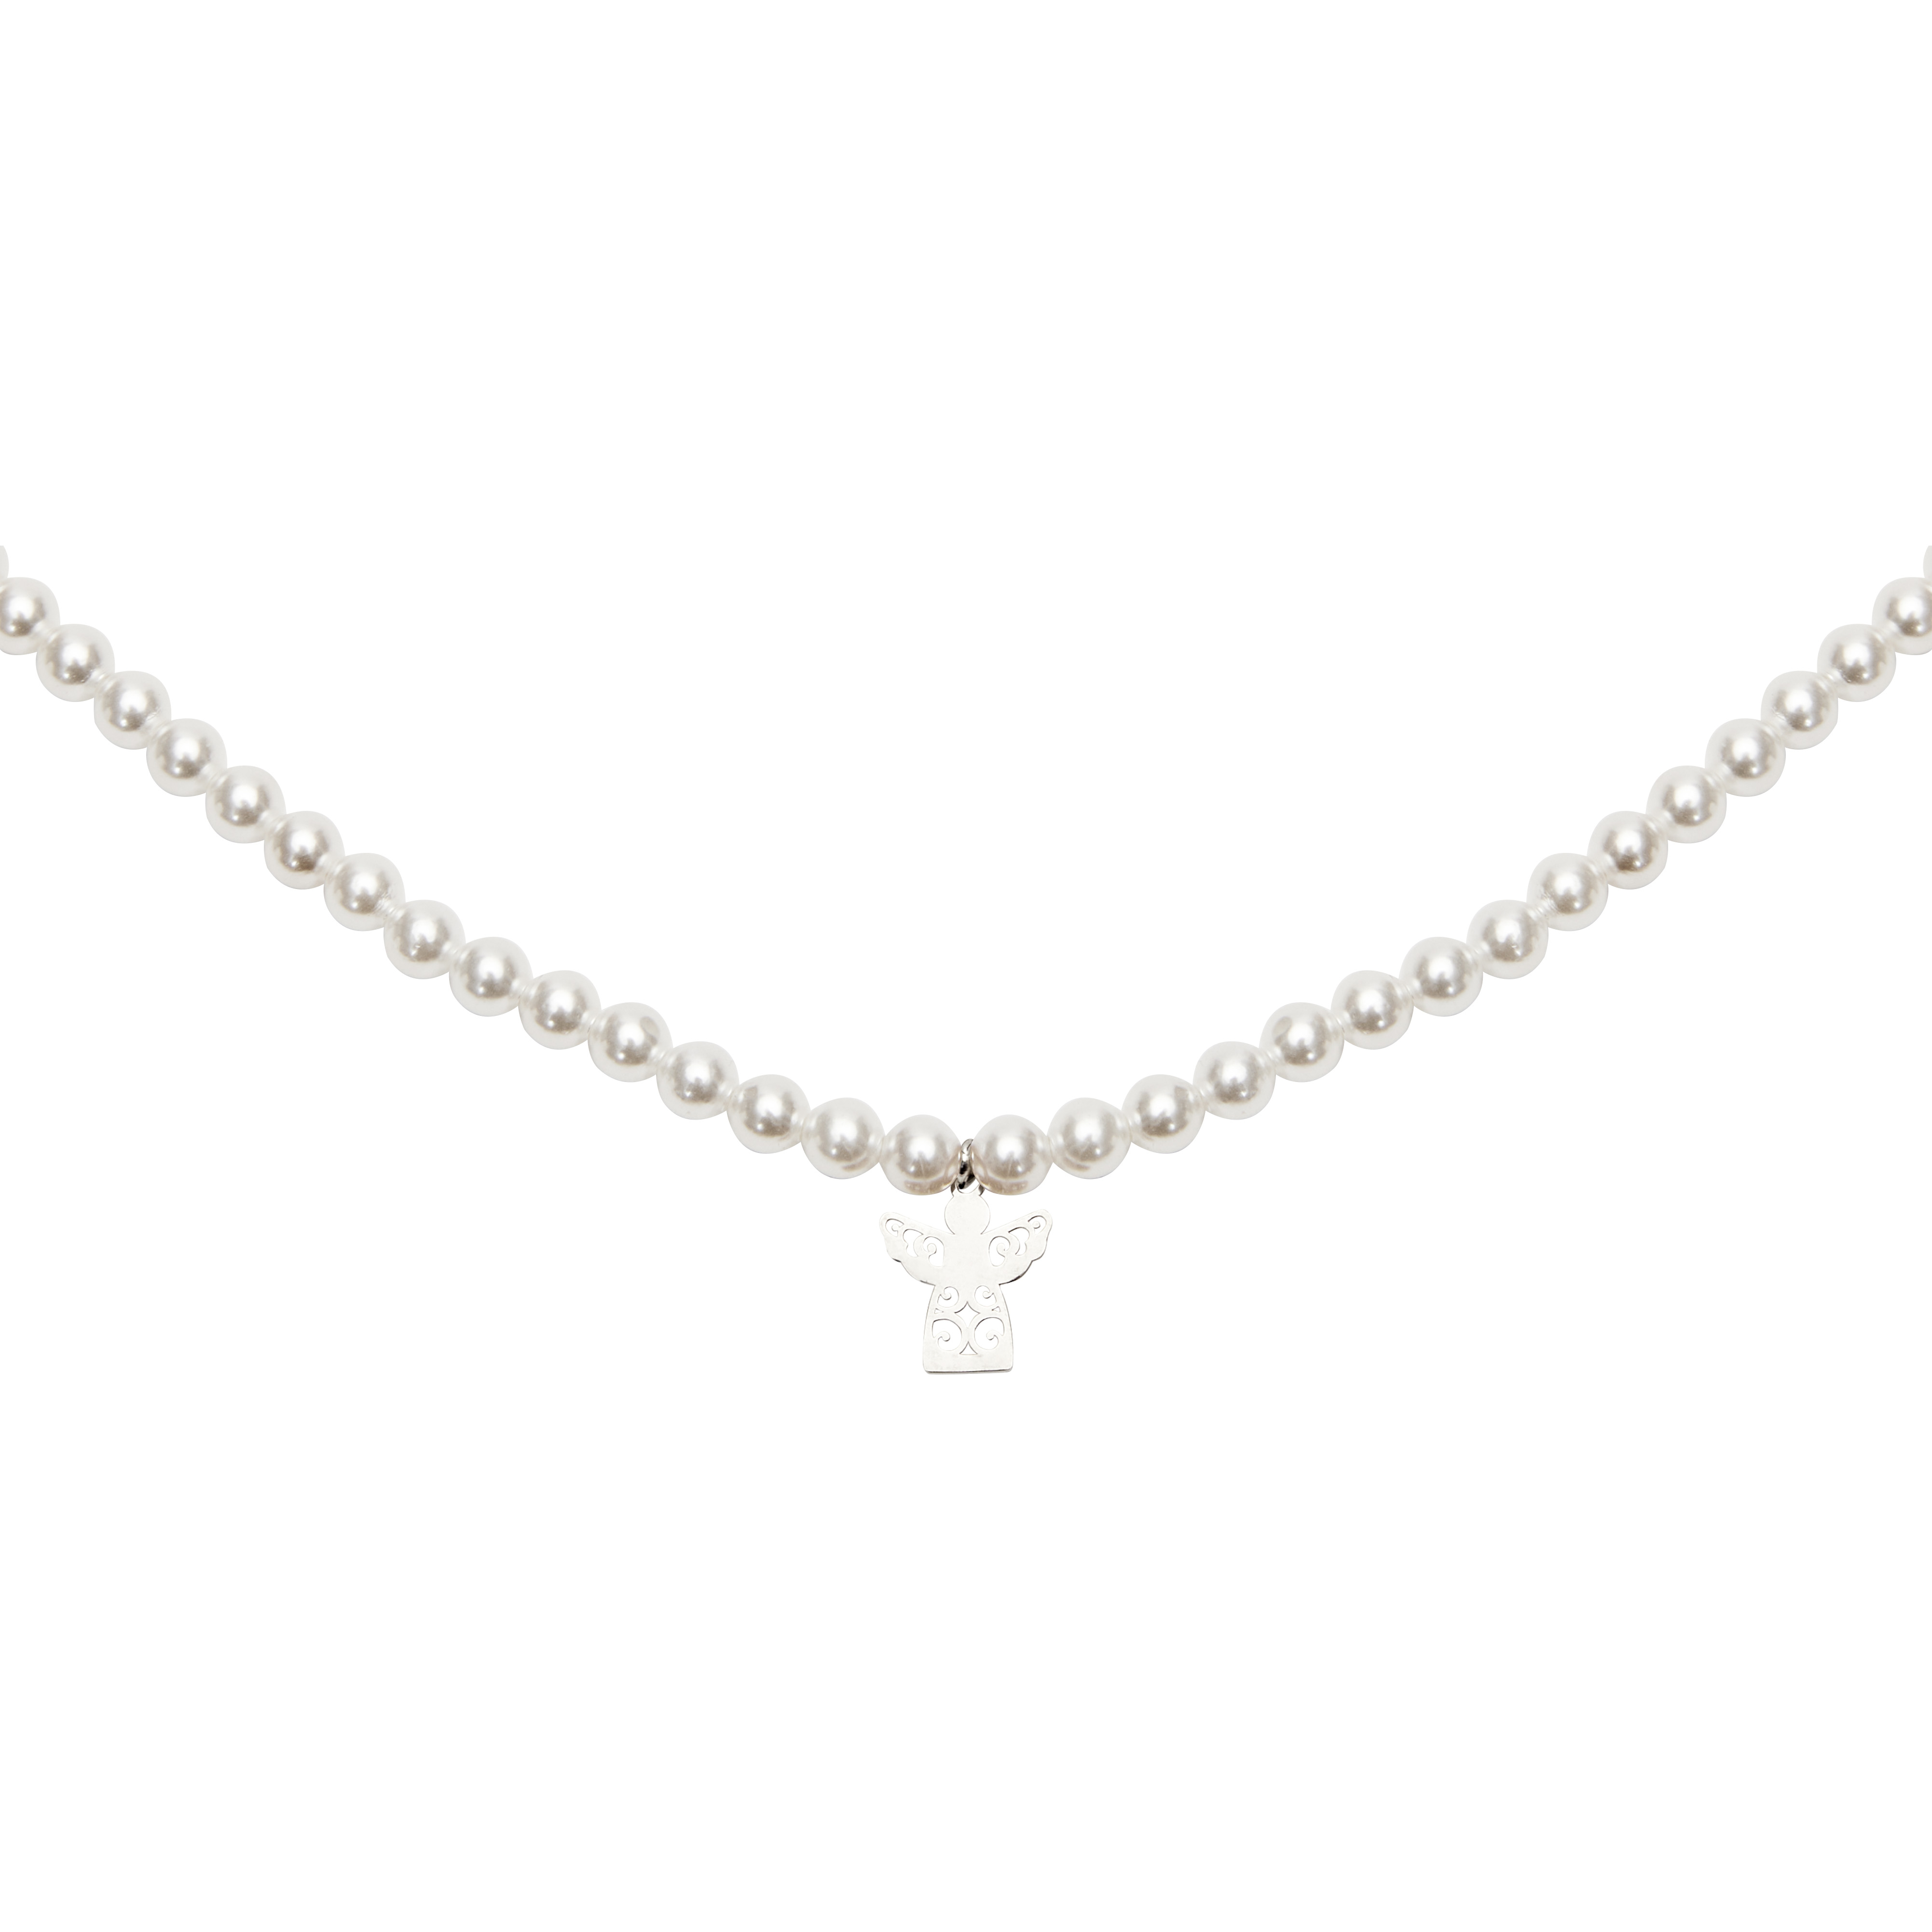 Pearl necklace-stainless steel-angel